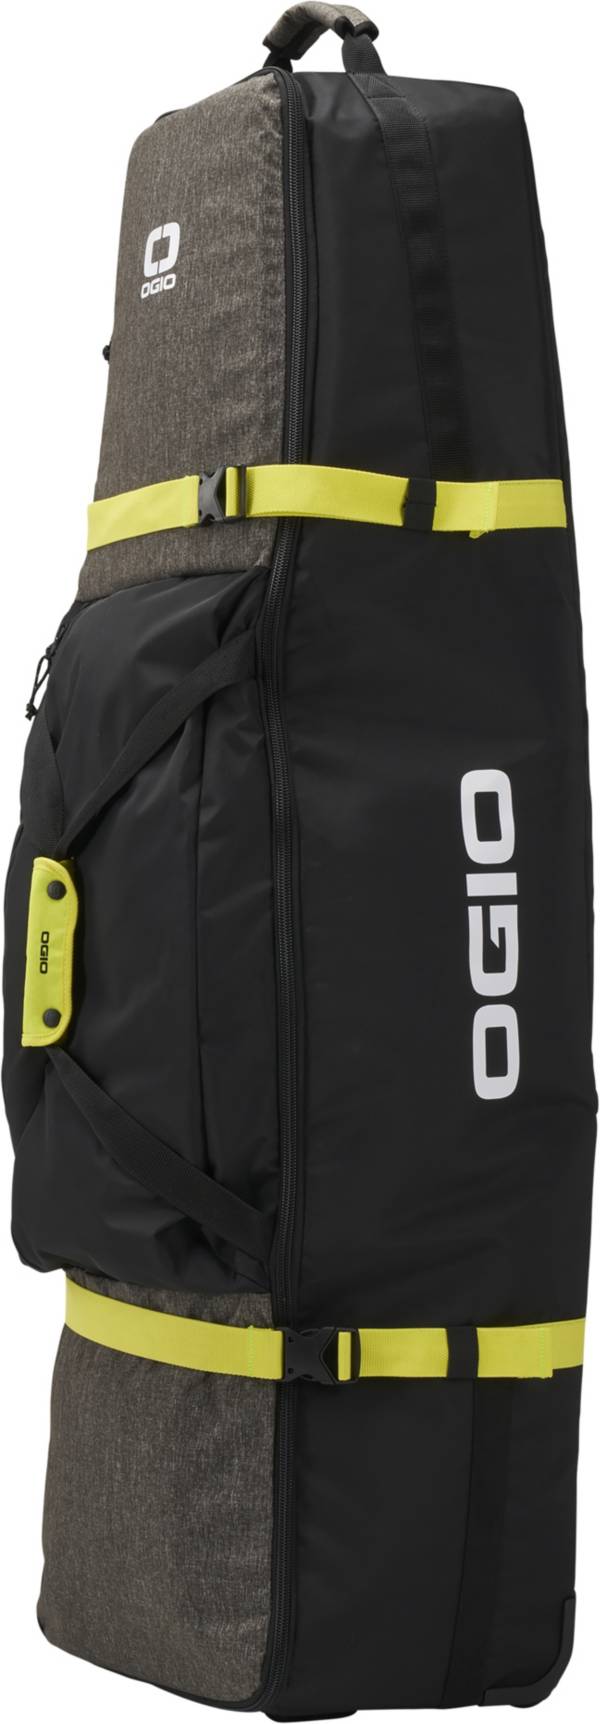 OGIO Alpha Travel Cover product image